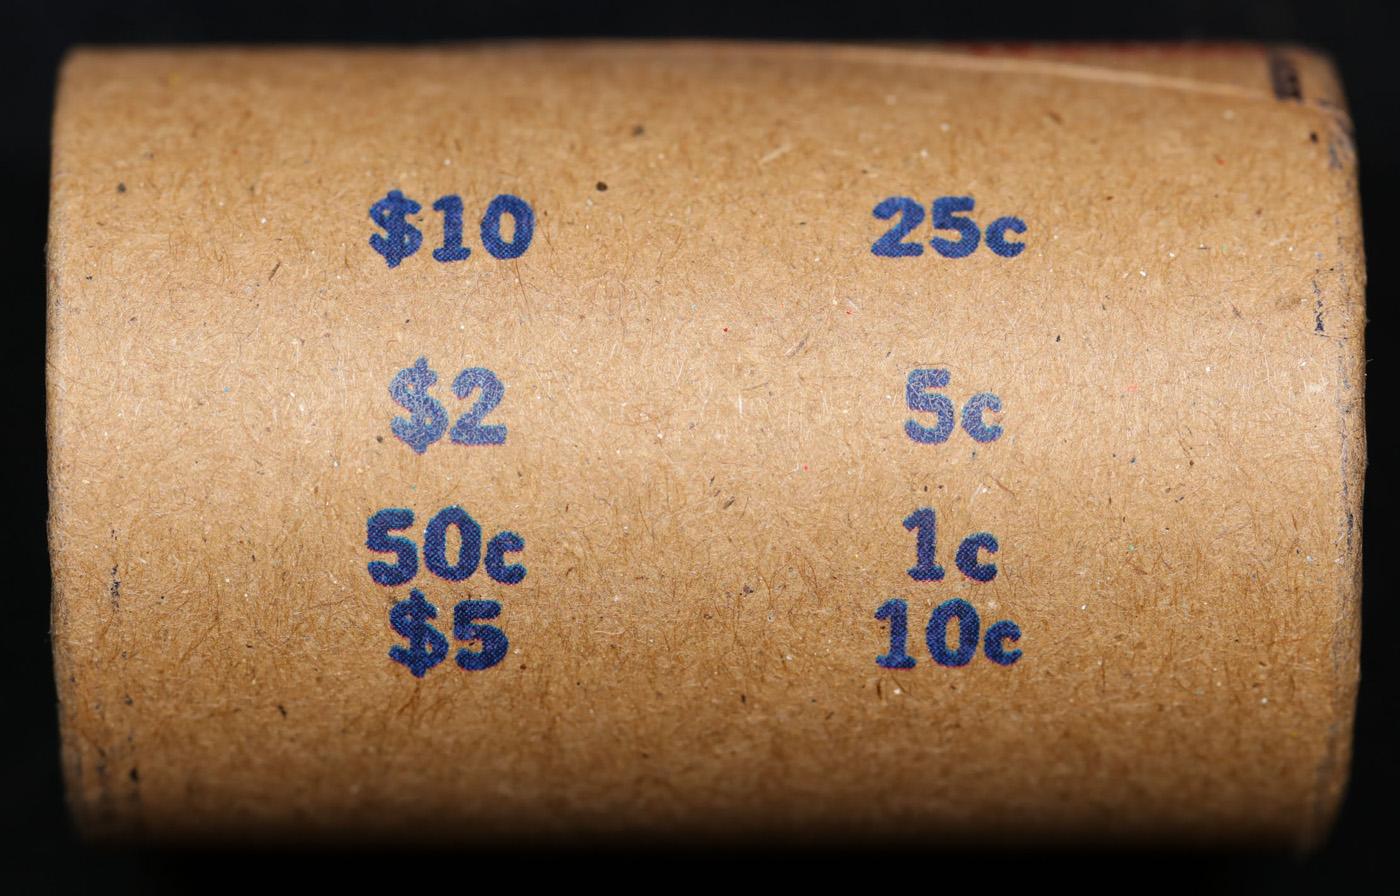 High Value - Mixed Covered End Roll - Marked "Morgan/Peace Reserve" - Weight shows x20 Coins (FC)